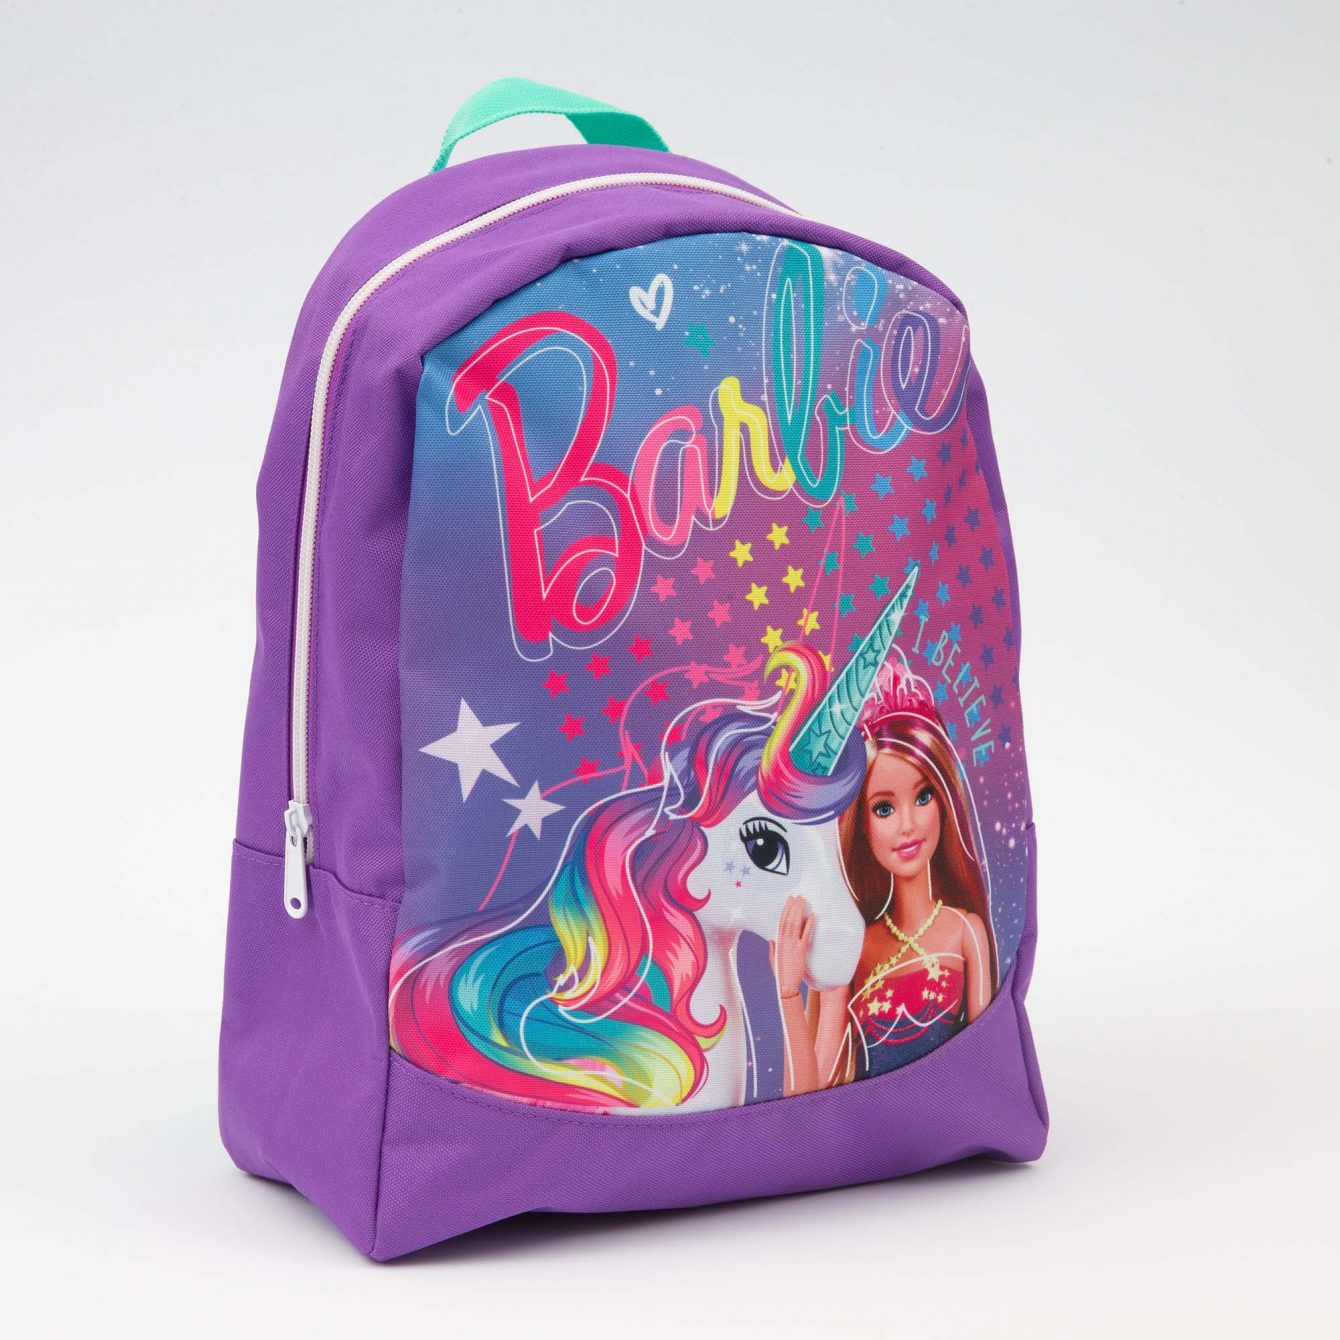 Barbie: here is the complete collection for back to school